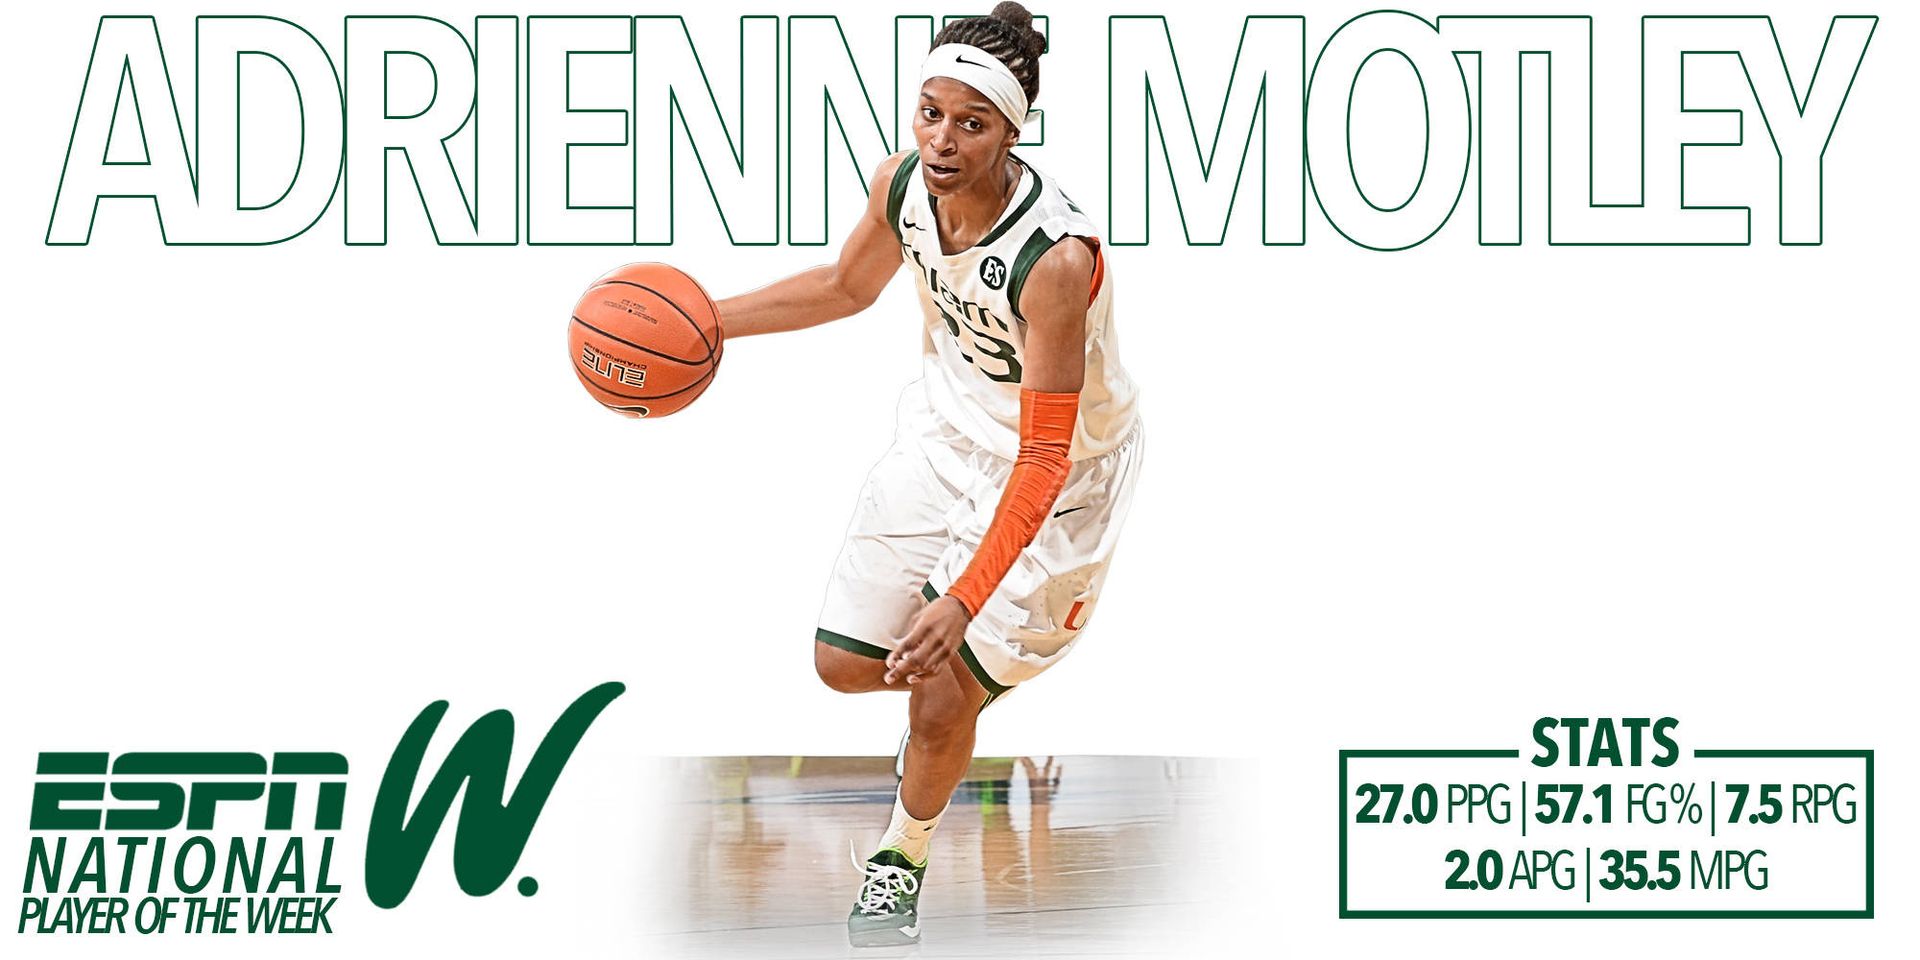 Motley Named National Player of the Week